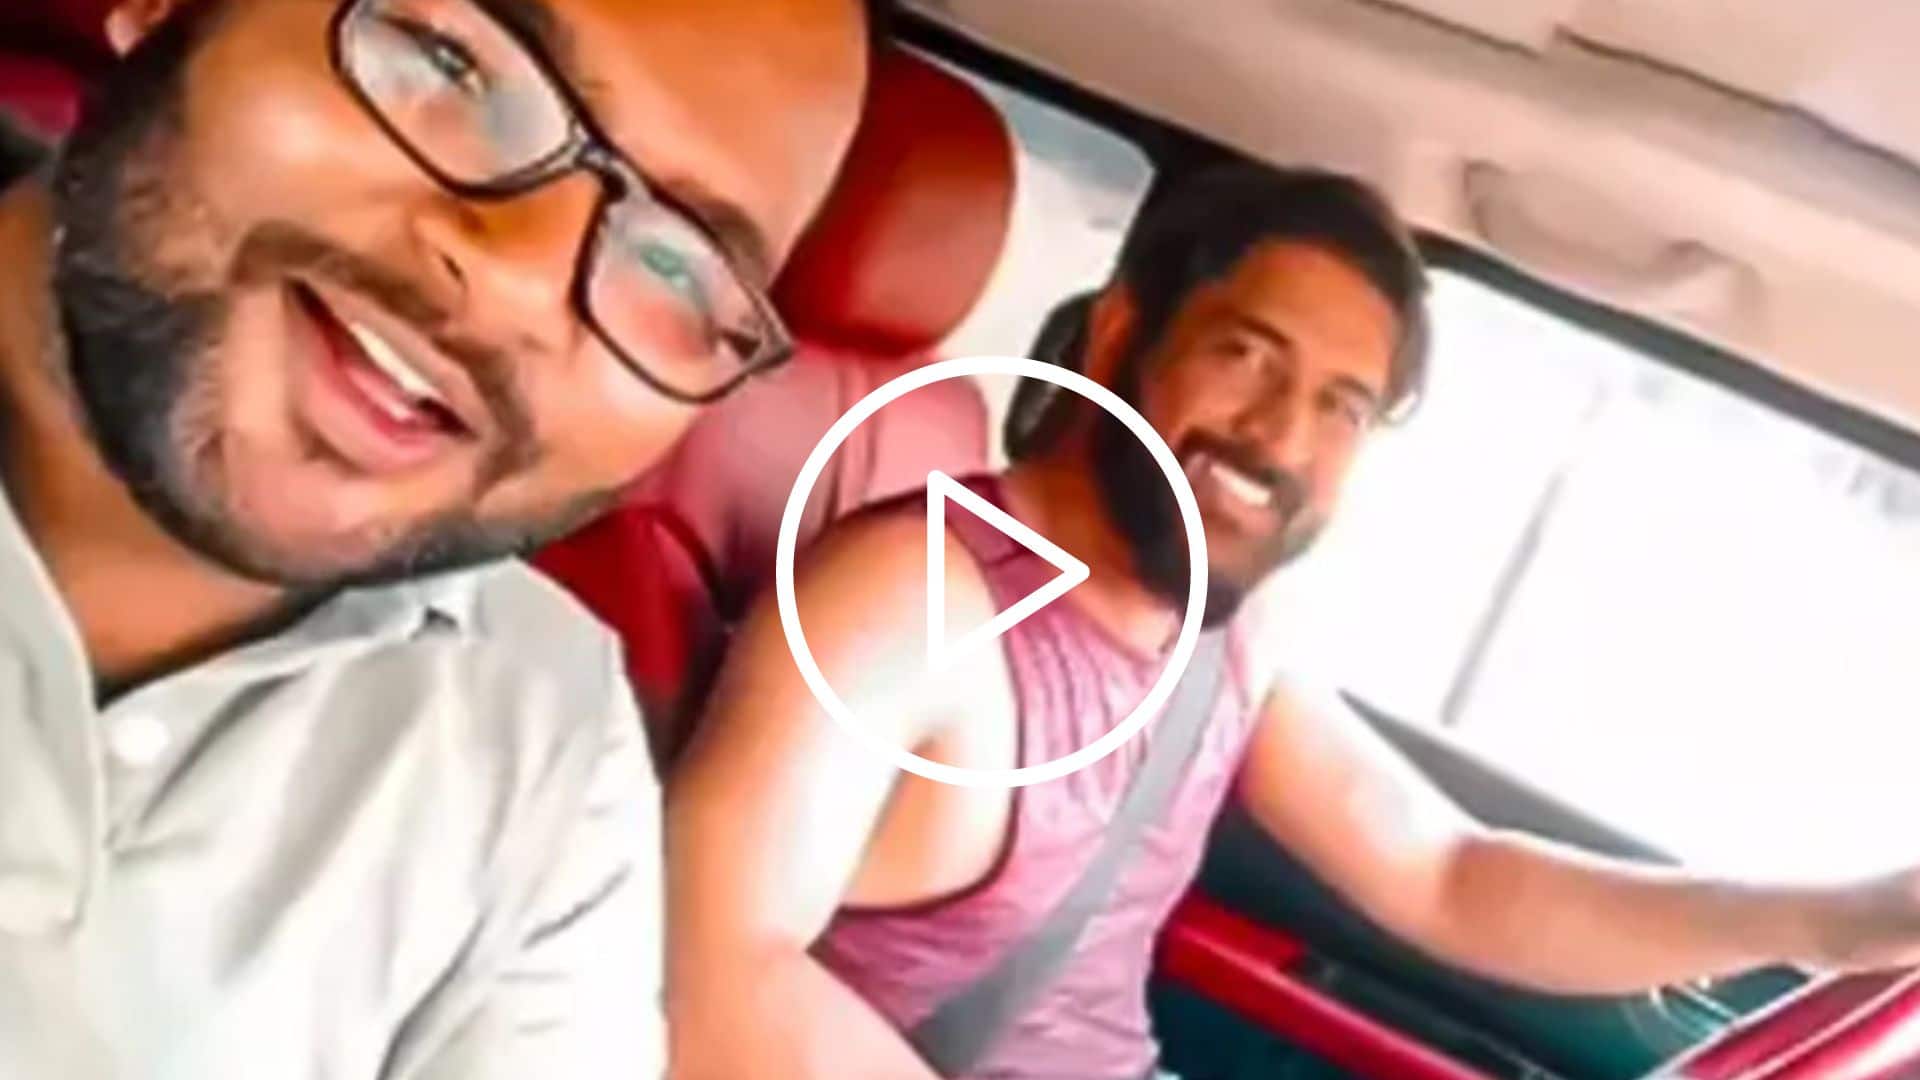 [Watch] 'Don't Let Him Flee,' Fans Erupt After MS Dhoni's Latest Car Ride Video